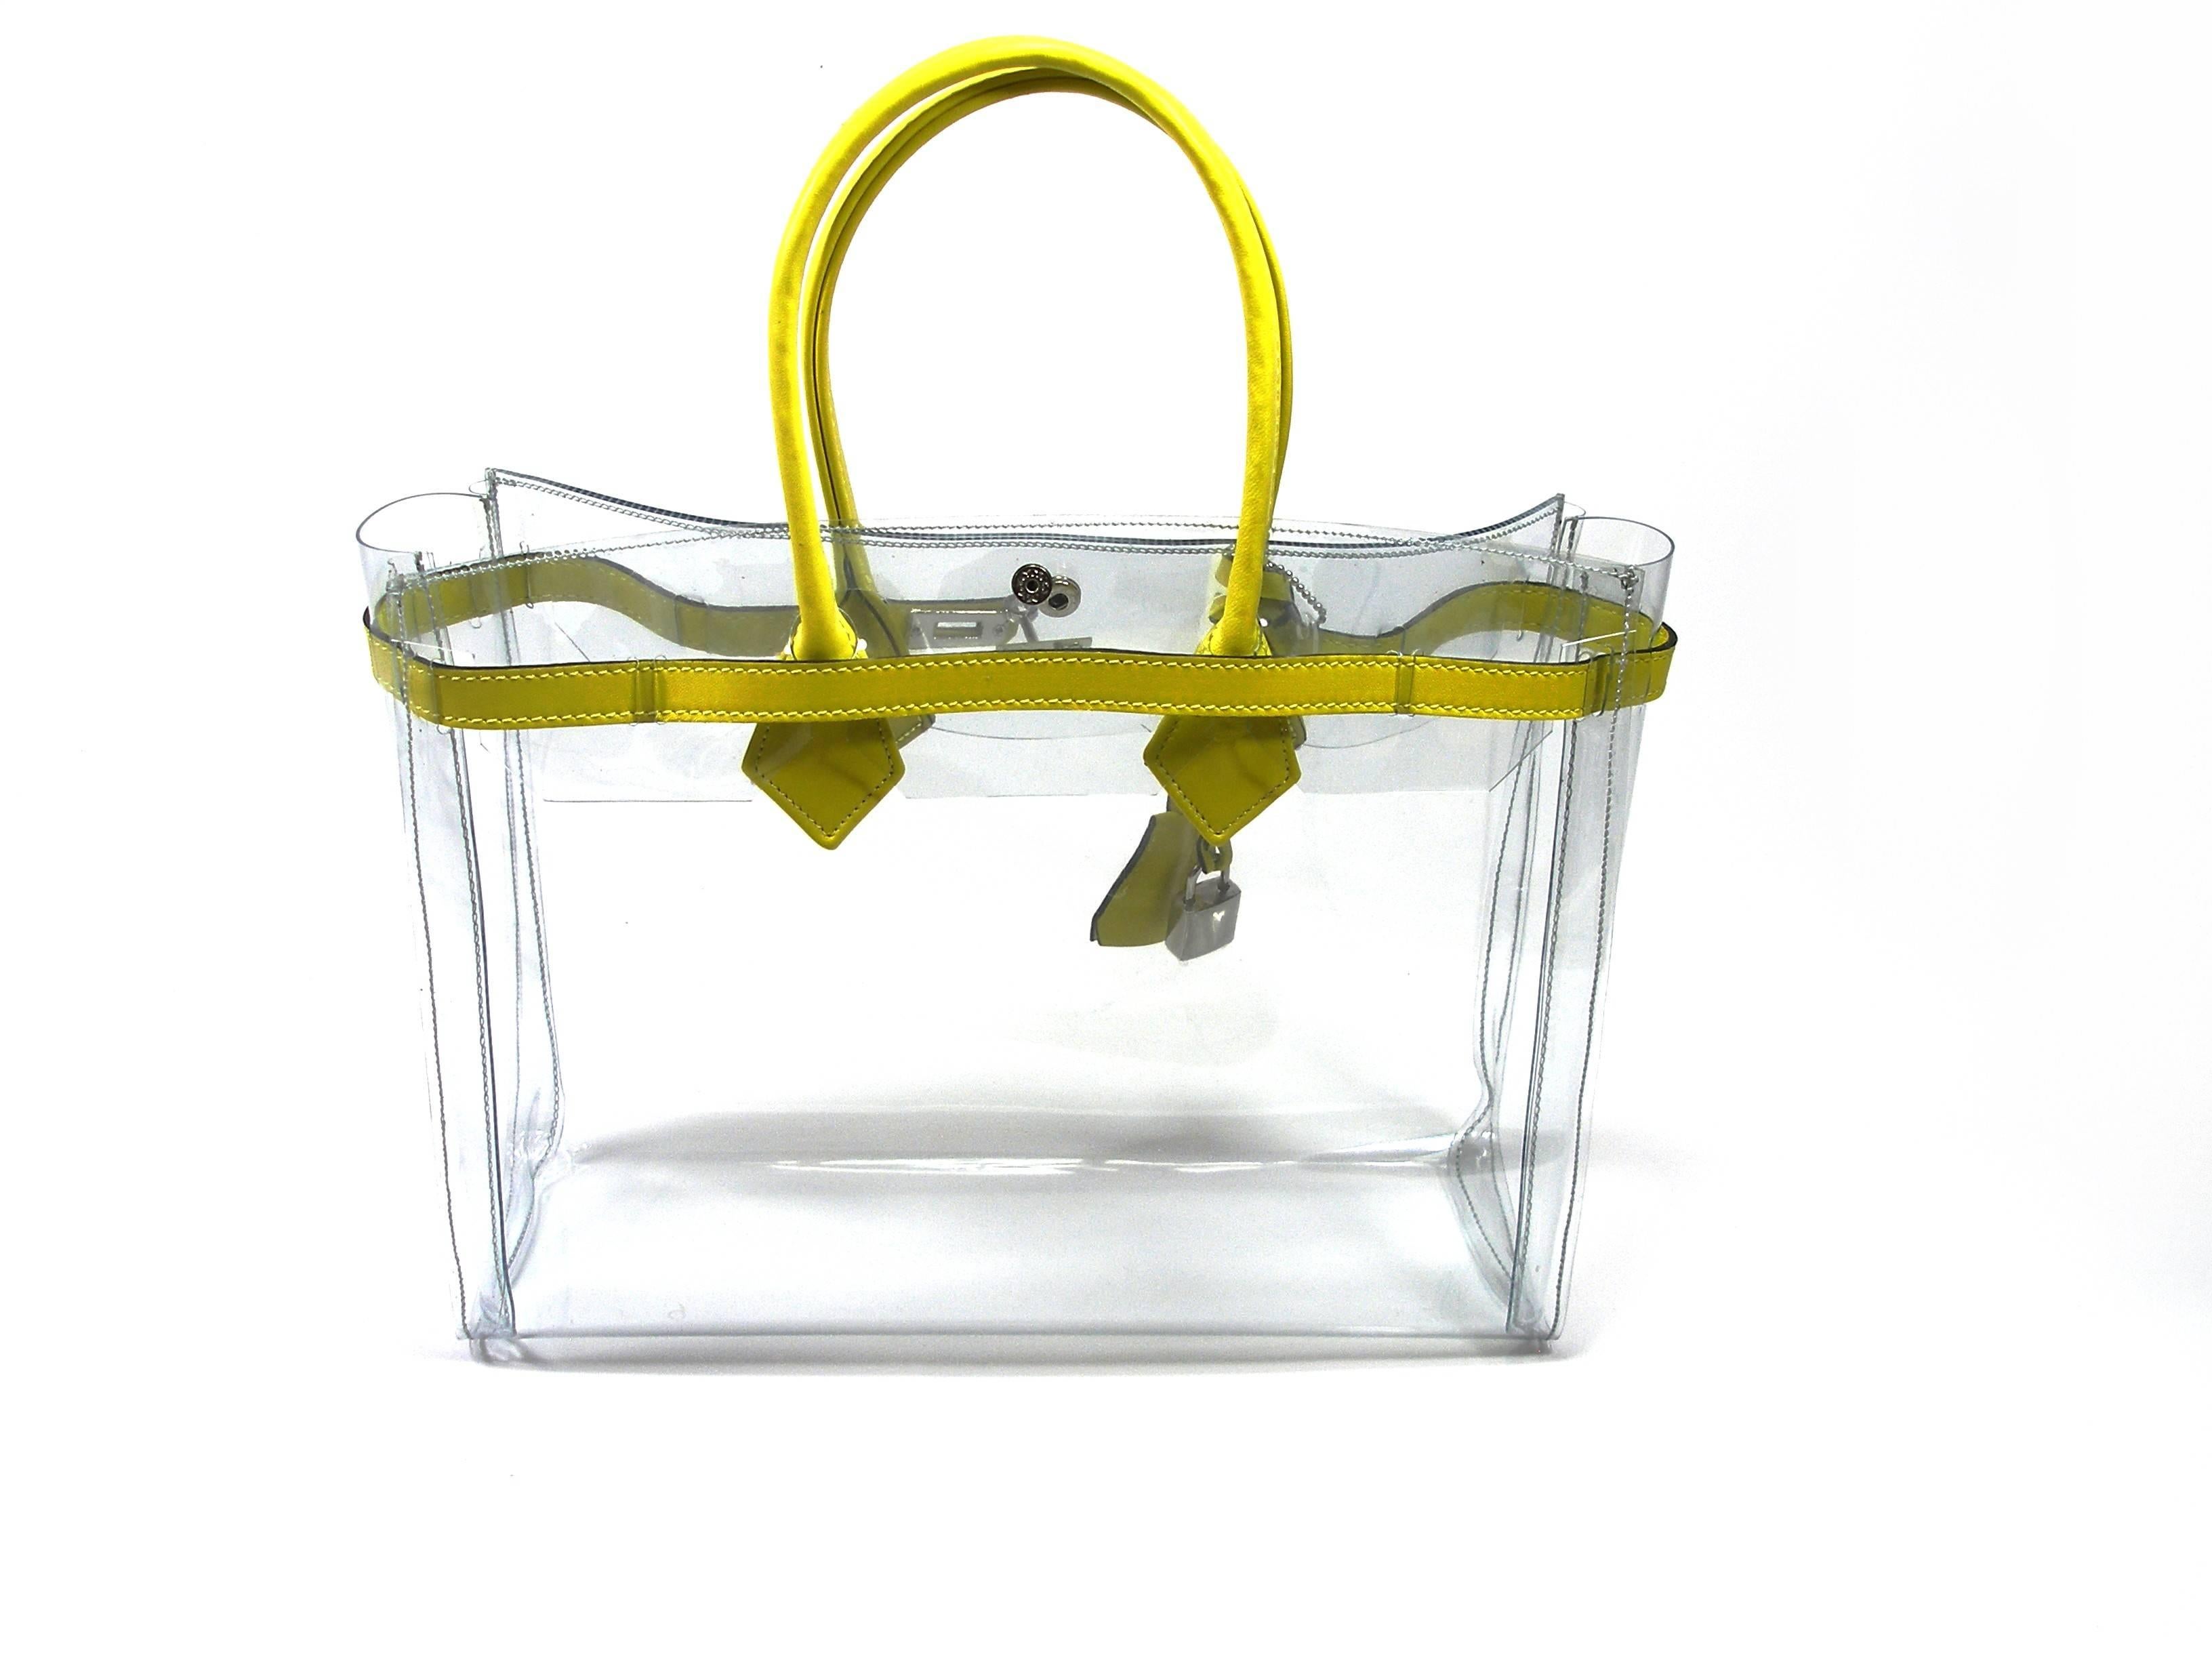 MA-GNI-FIC 
Our own production and brand filed Mon Autre Sac ® 
Highlight your luxury accessories!
Nice Pvc  and Leather Bag 
Cabas Diamant 
Size :  L 32 X H 24 X P 12
Yellow leather
PVC 
Brand New
Its comes with dustbag Mon Autre Sac